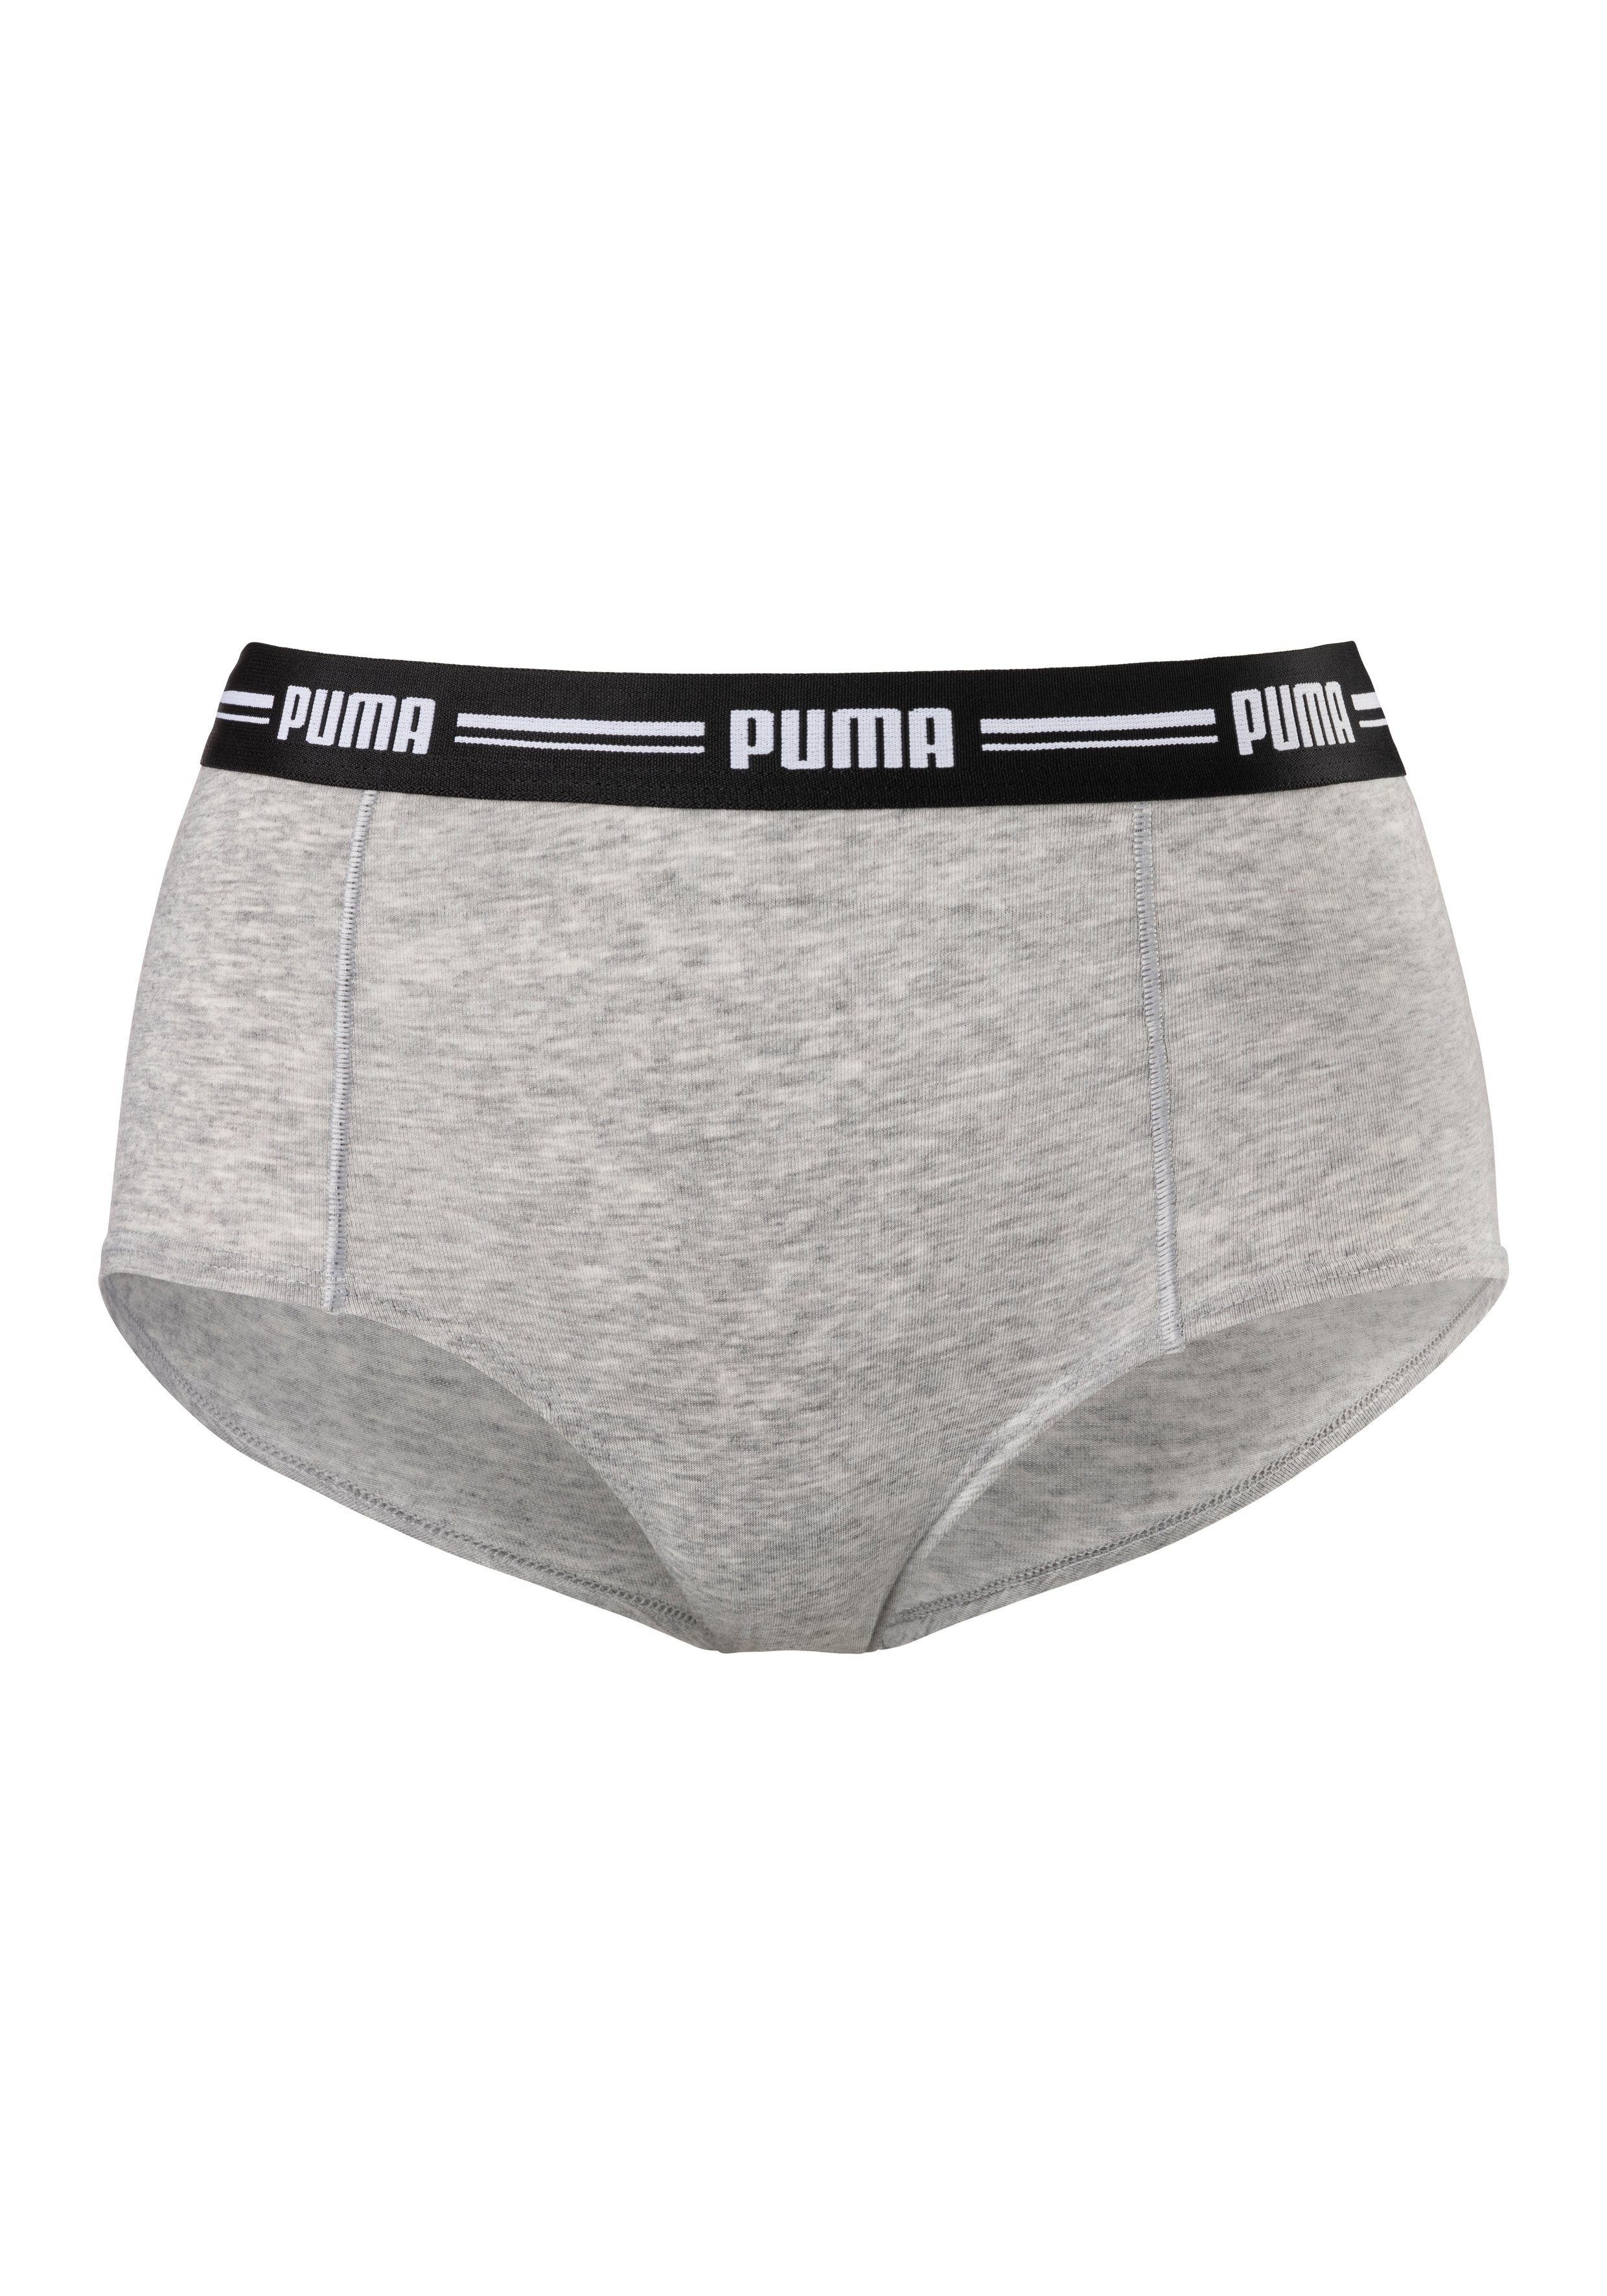 PUMA Iconic (Packung, grau-meliert 2-St) Panty